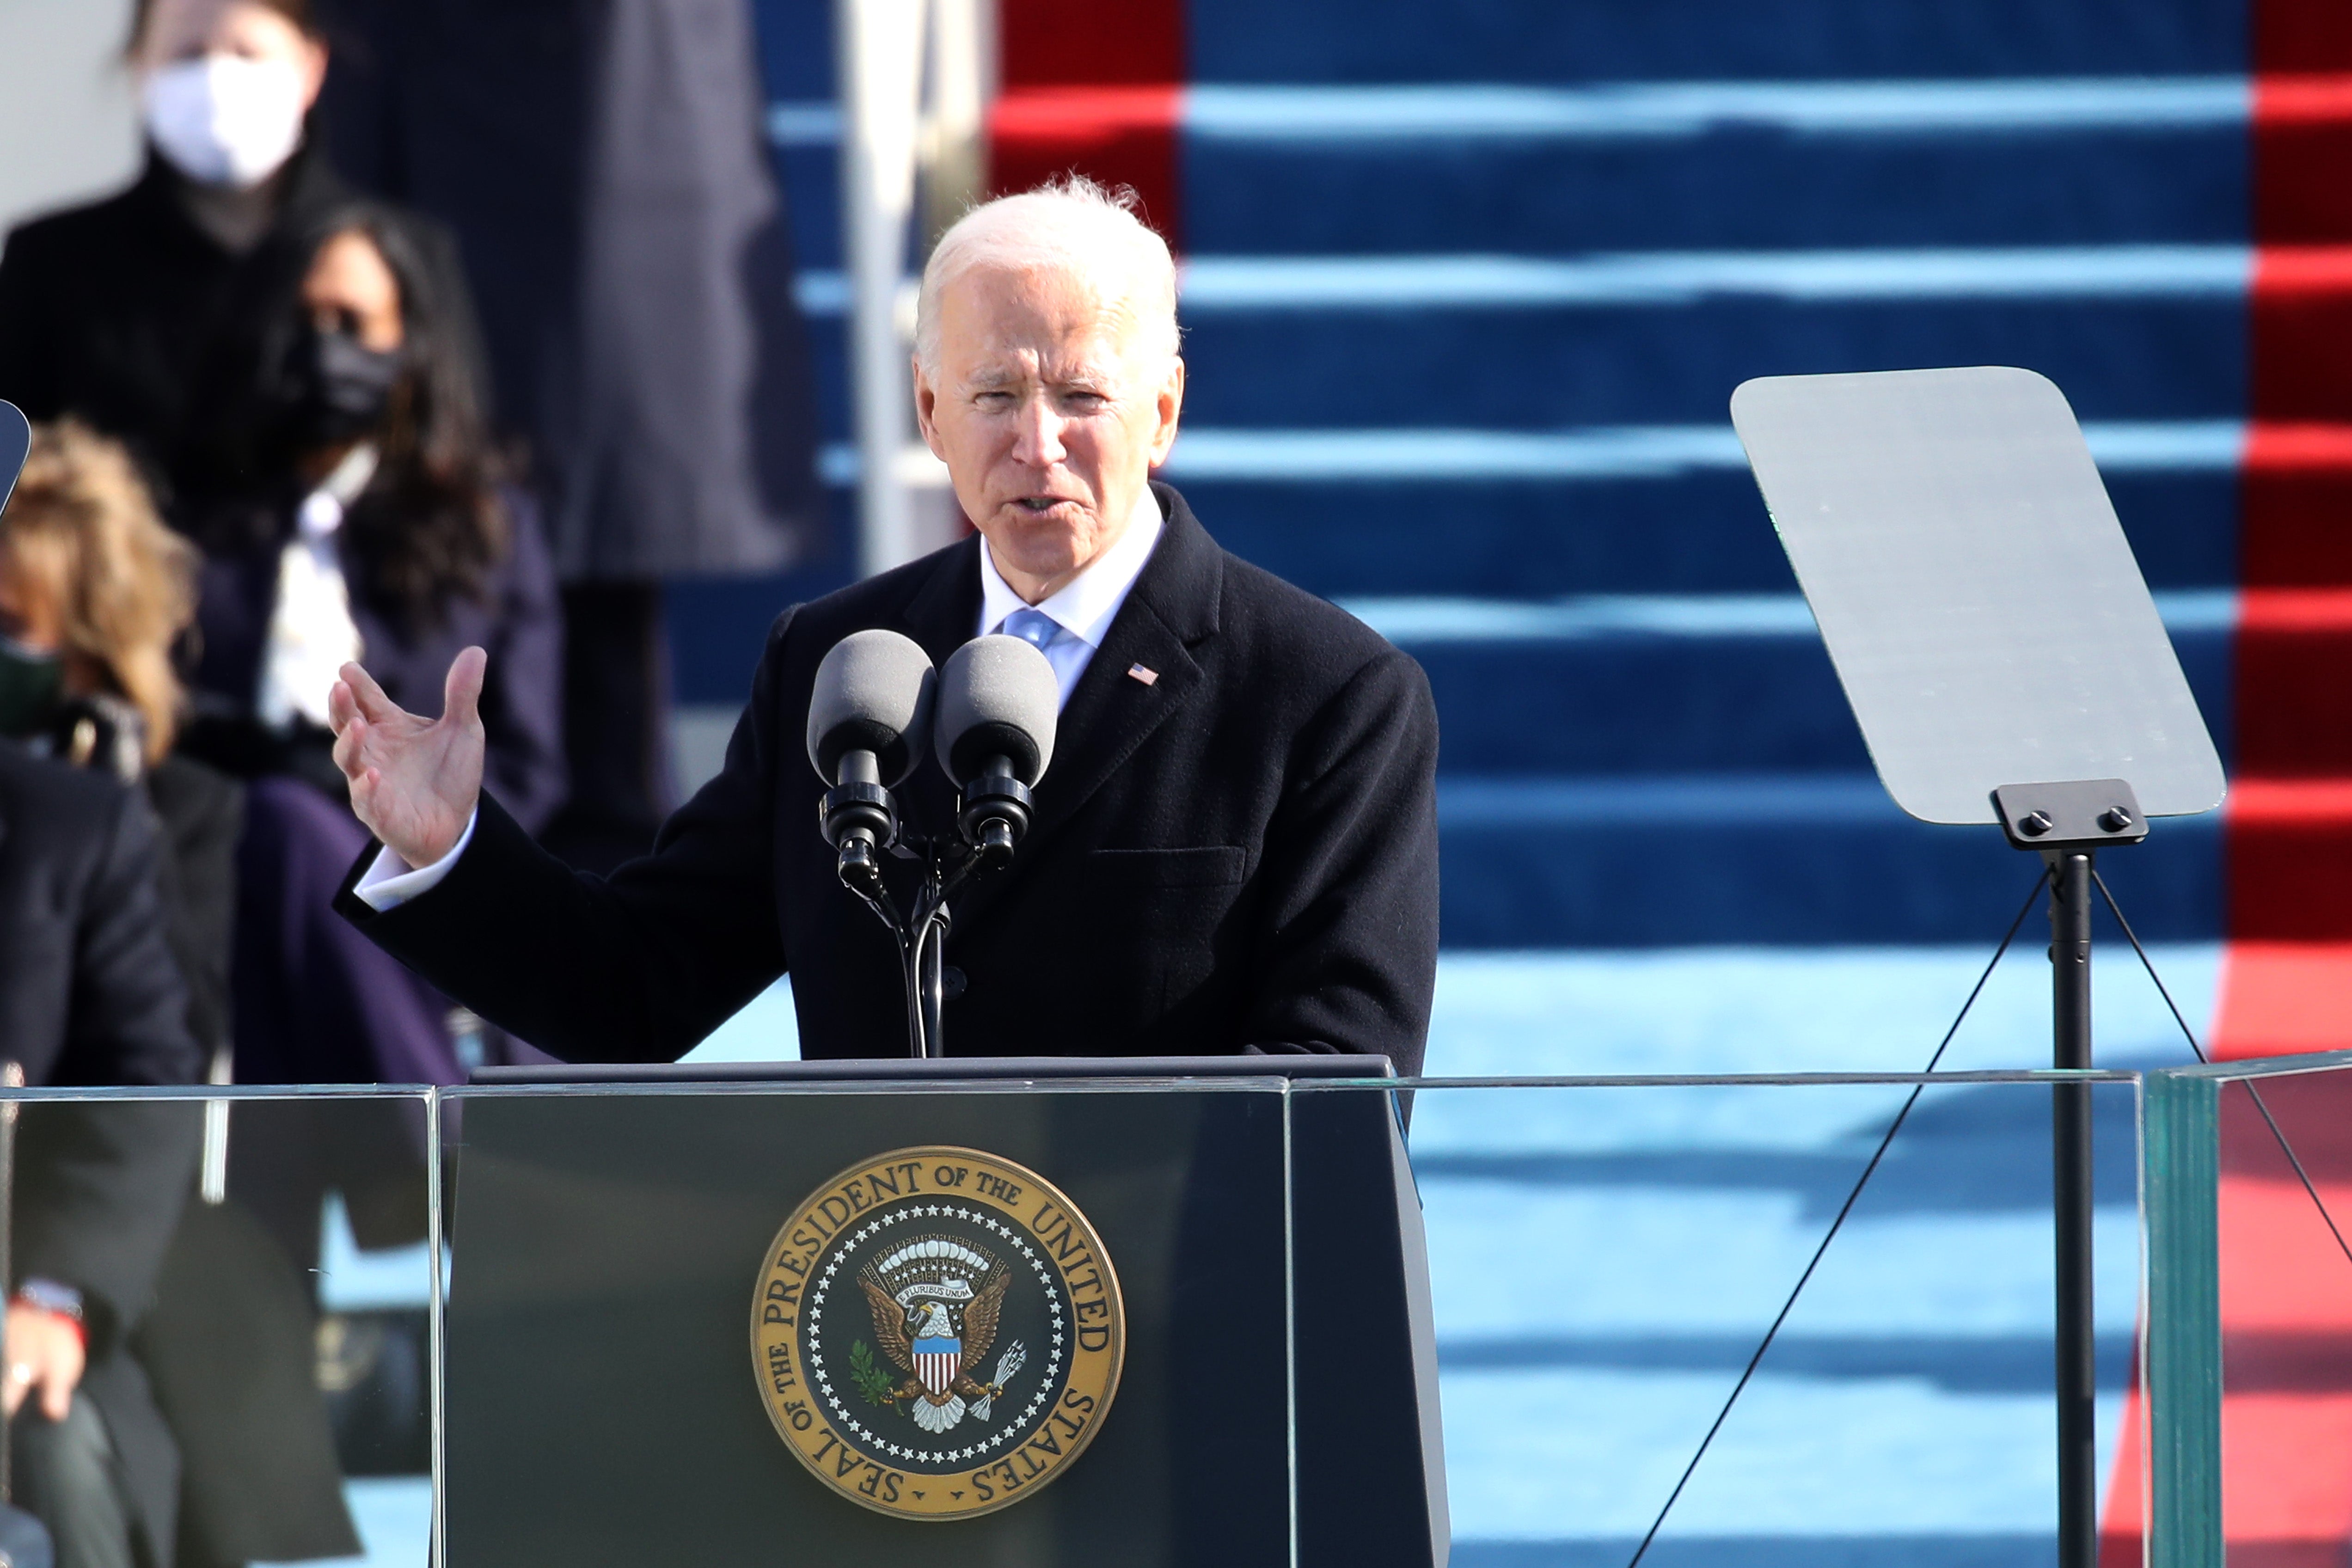 Joe Biden has defended his first year as president